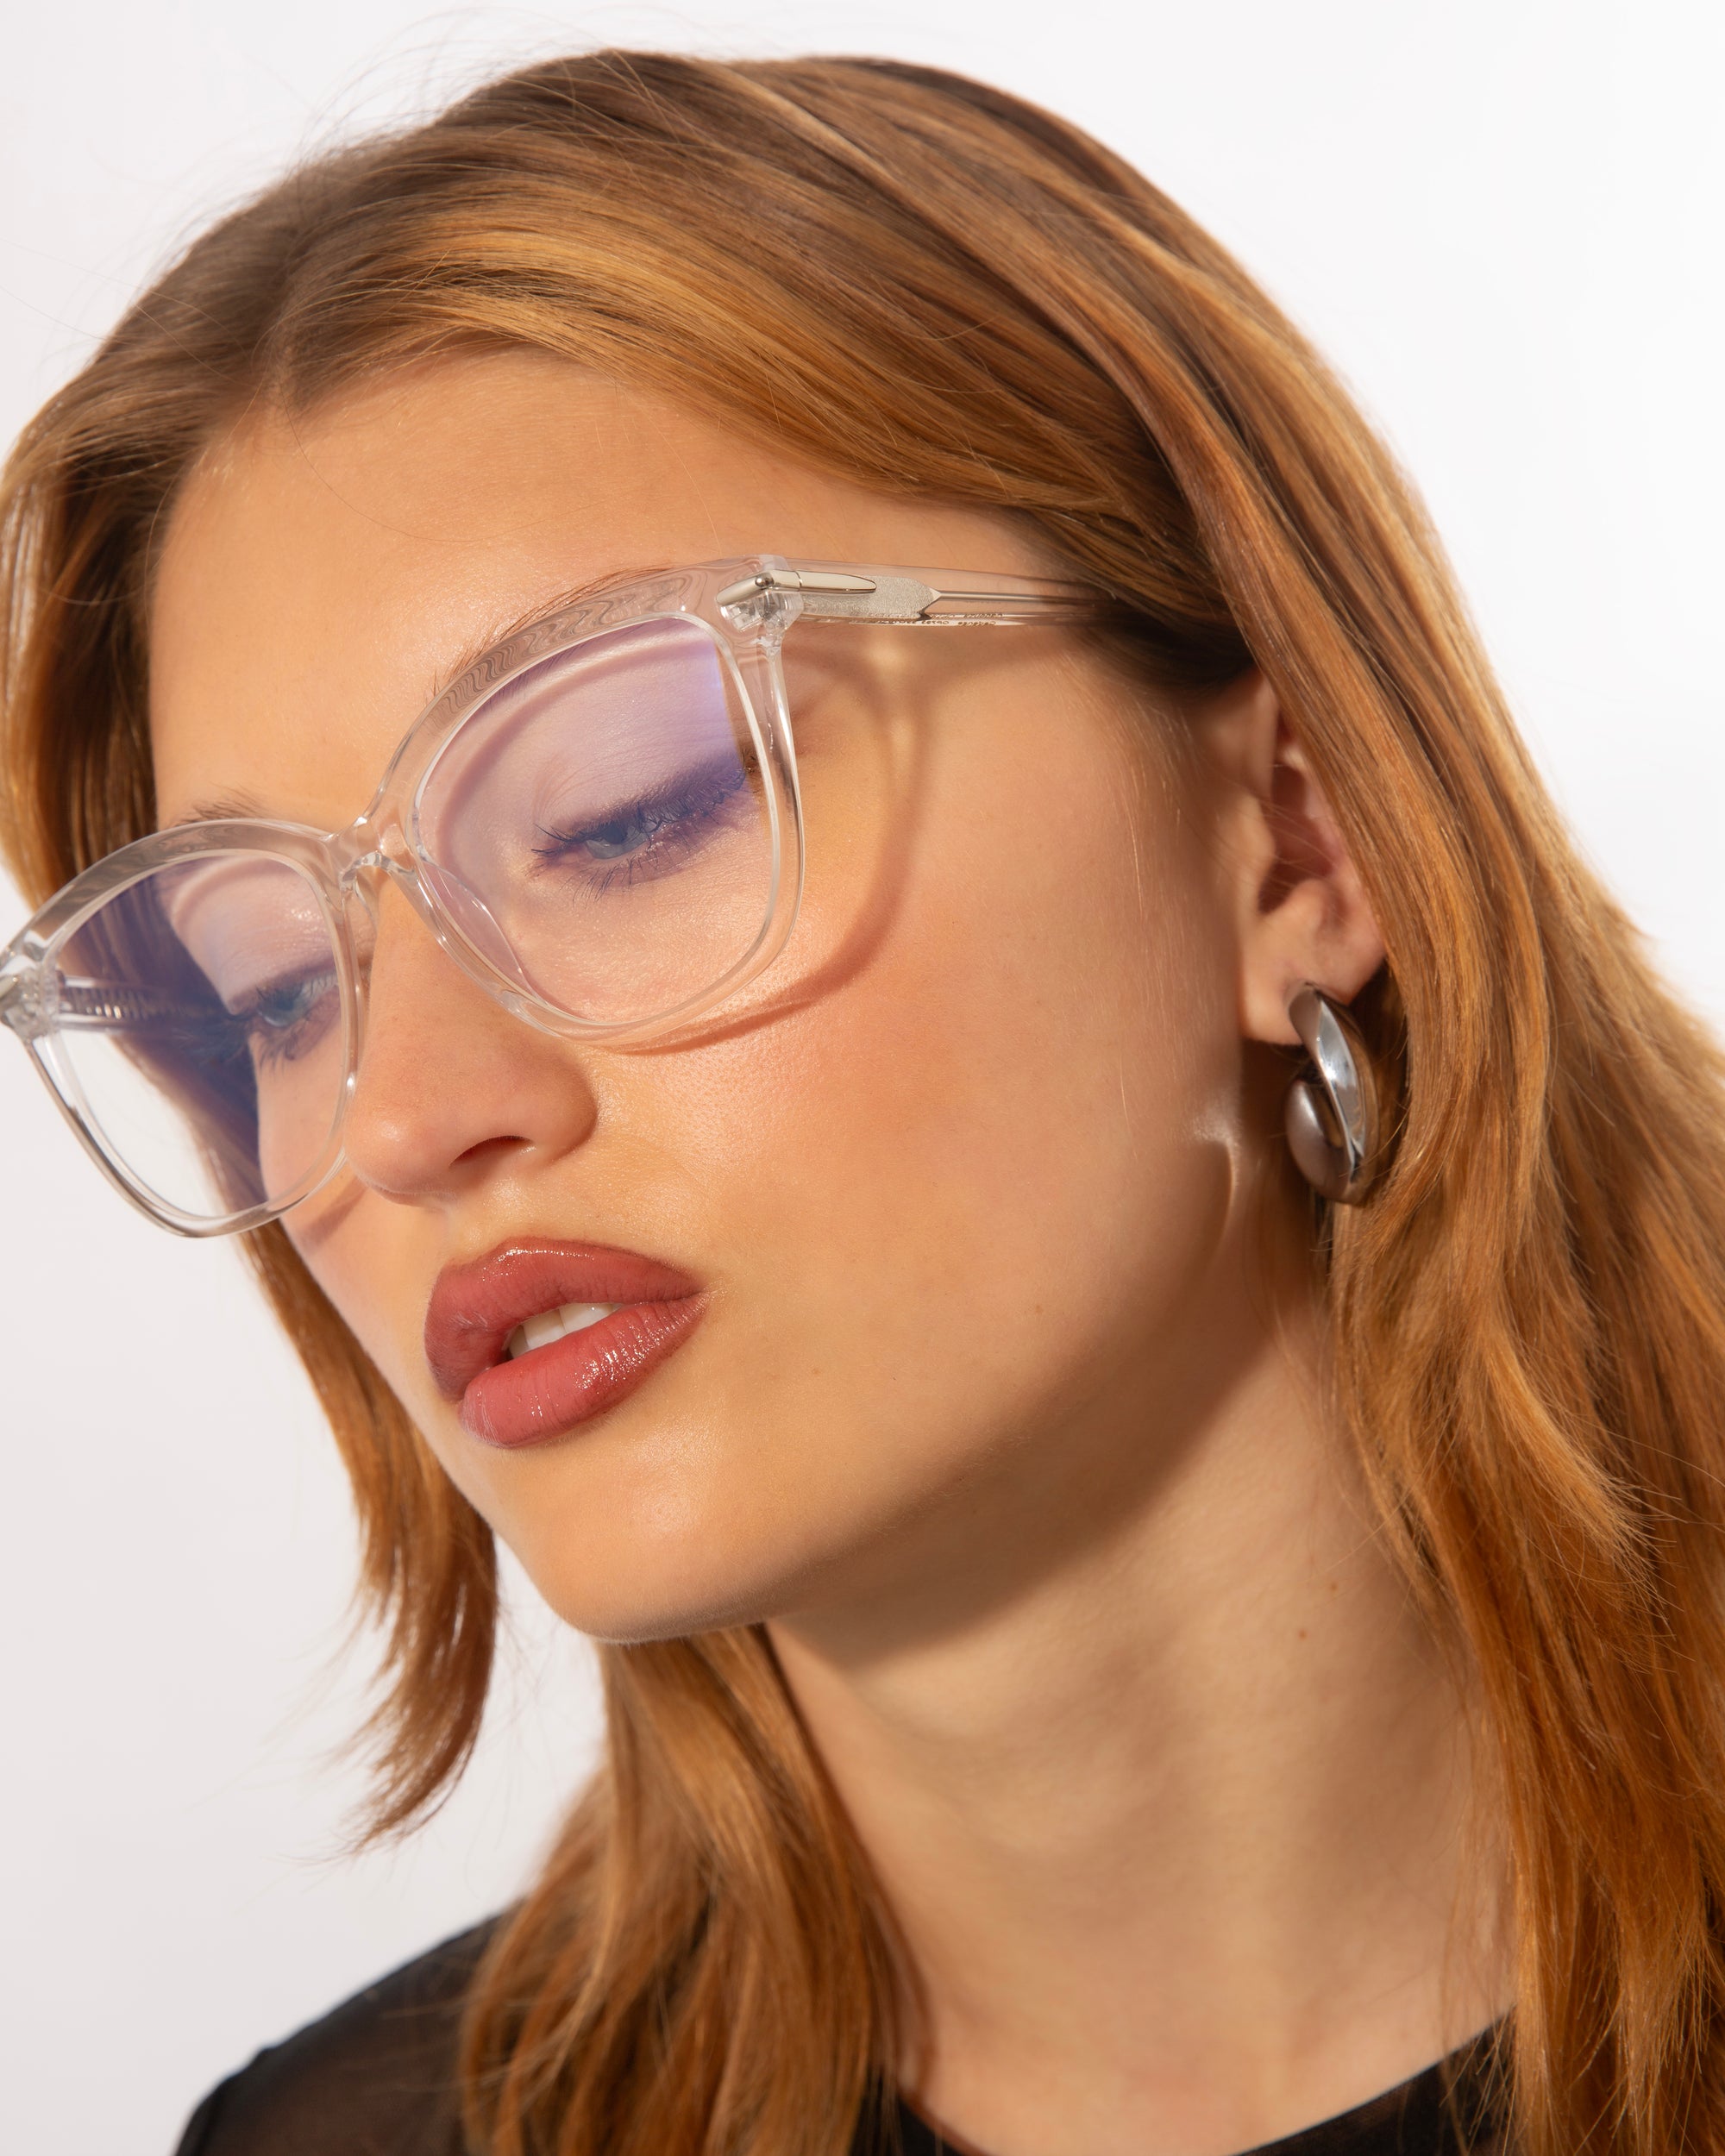 A person with light brown hair is wearing large, transparent Cadenza optical glasses by For Art's Sake® and hoop earrings. They have a neutral expression and are looking downward slightly. The background is plain white, highlighting their features.